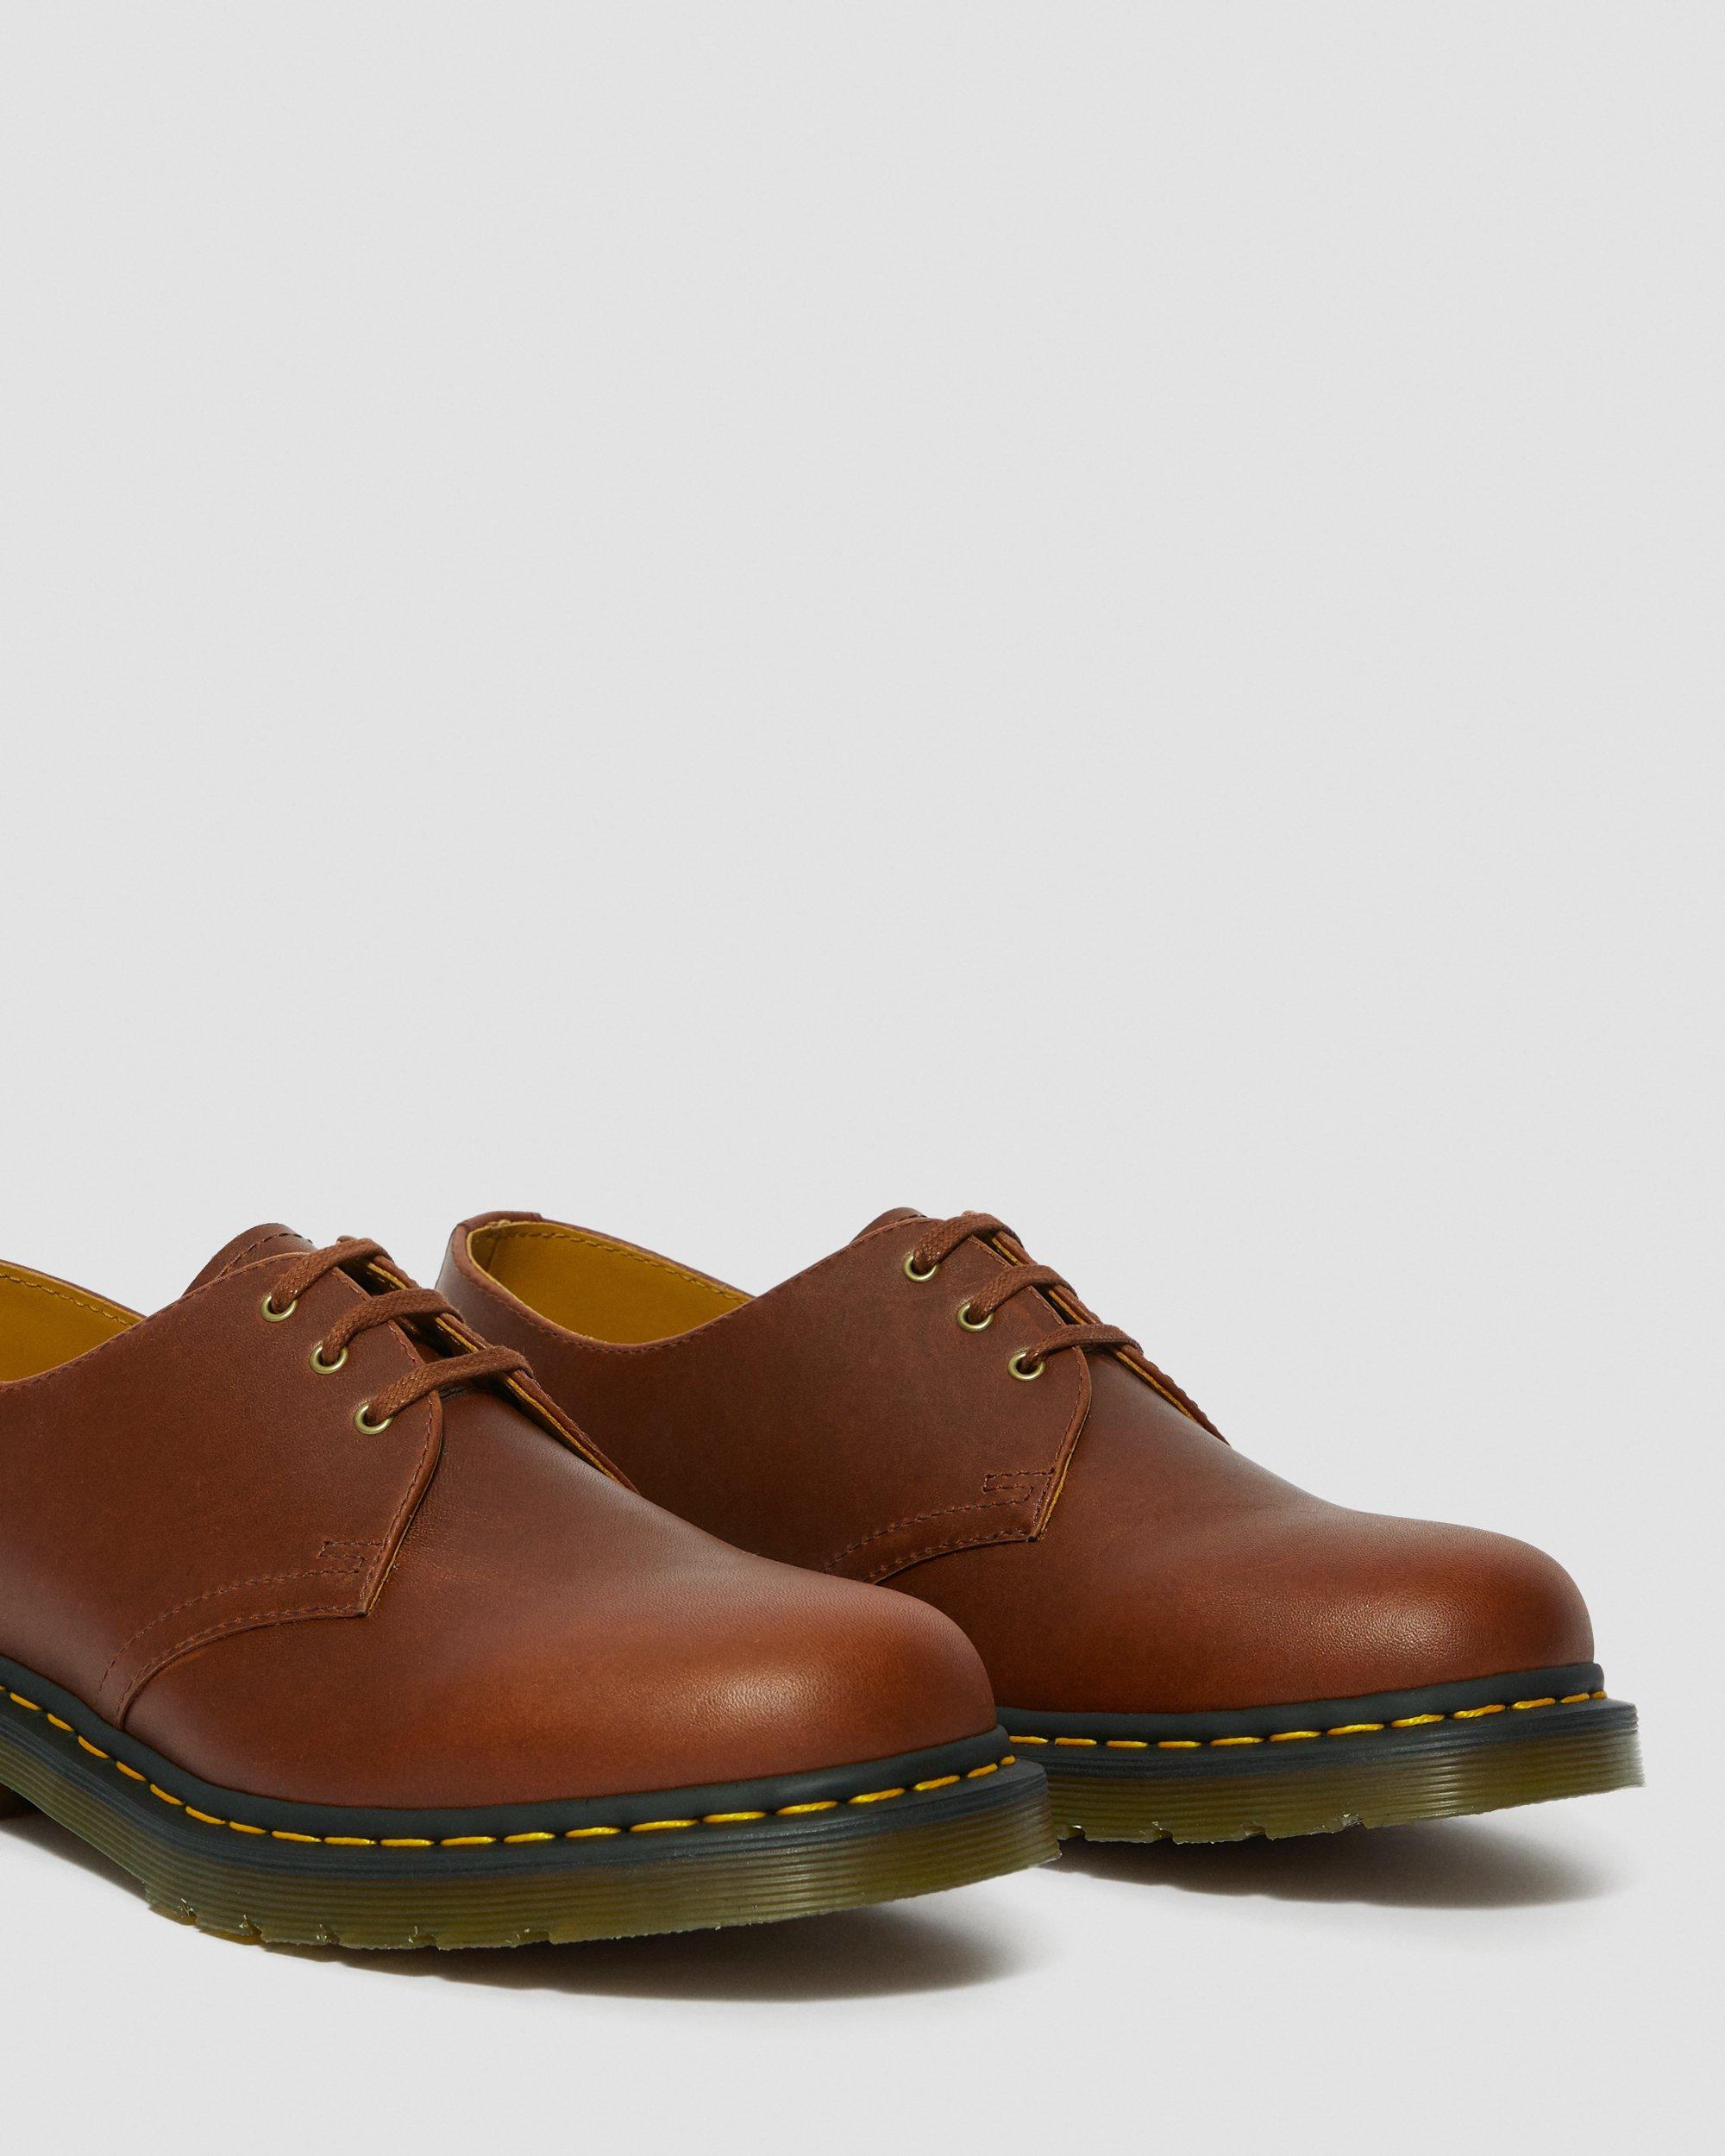 1461 Classico Leather Oxford Shoes | Dr. Martens